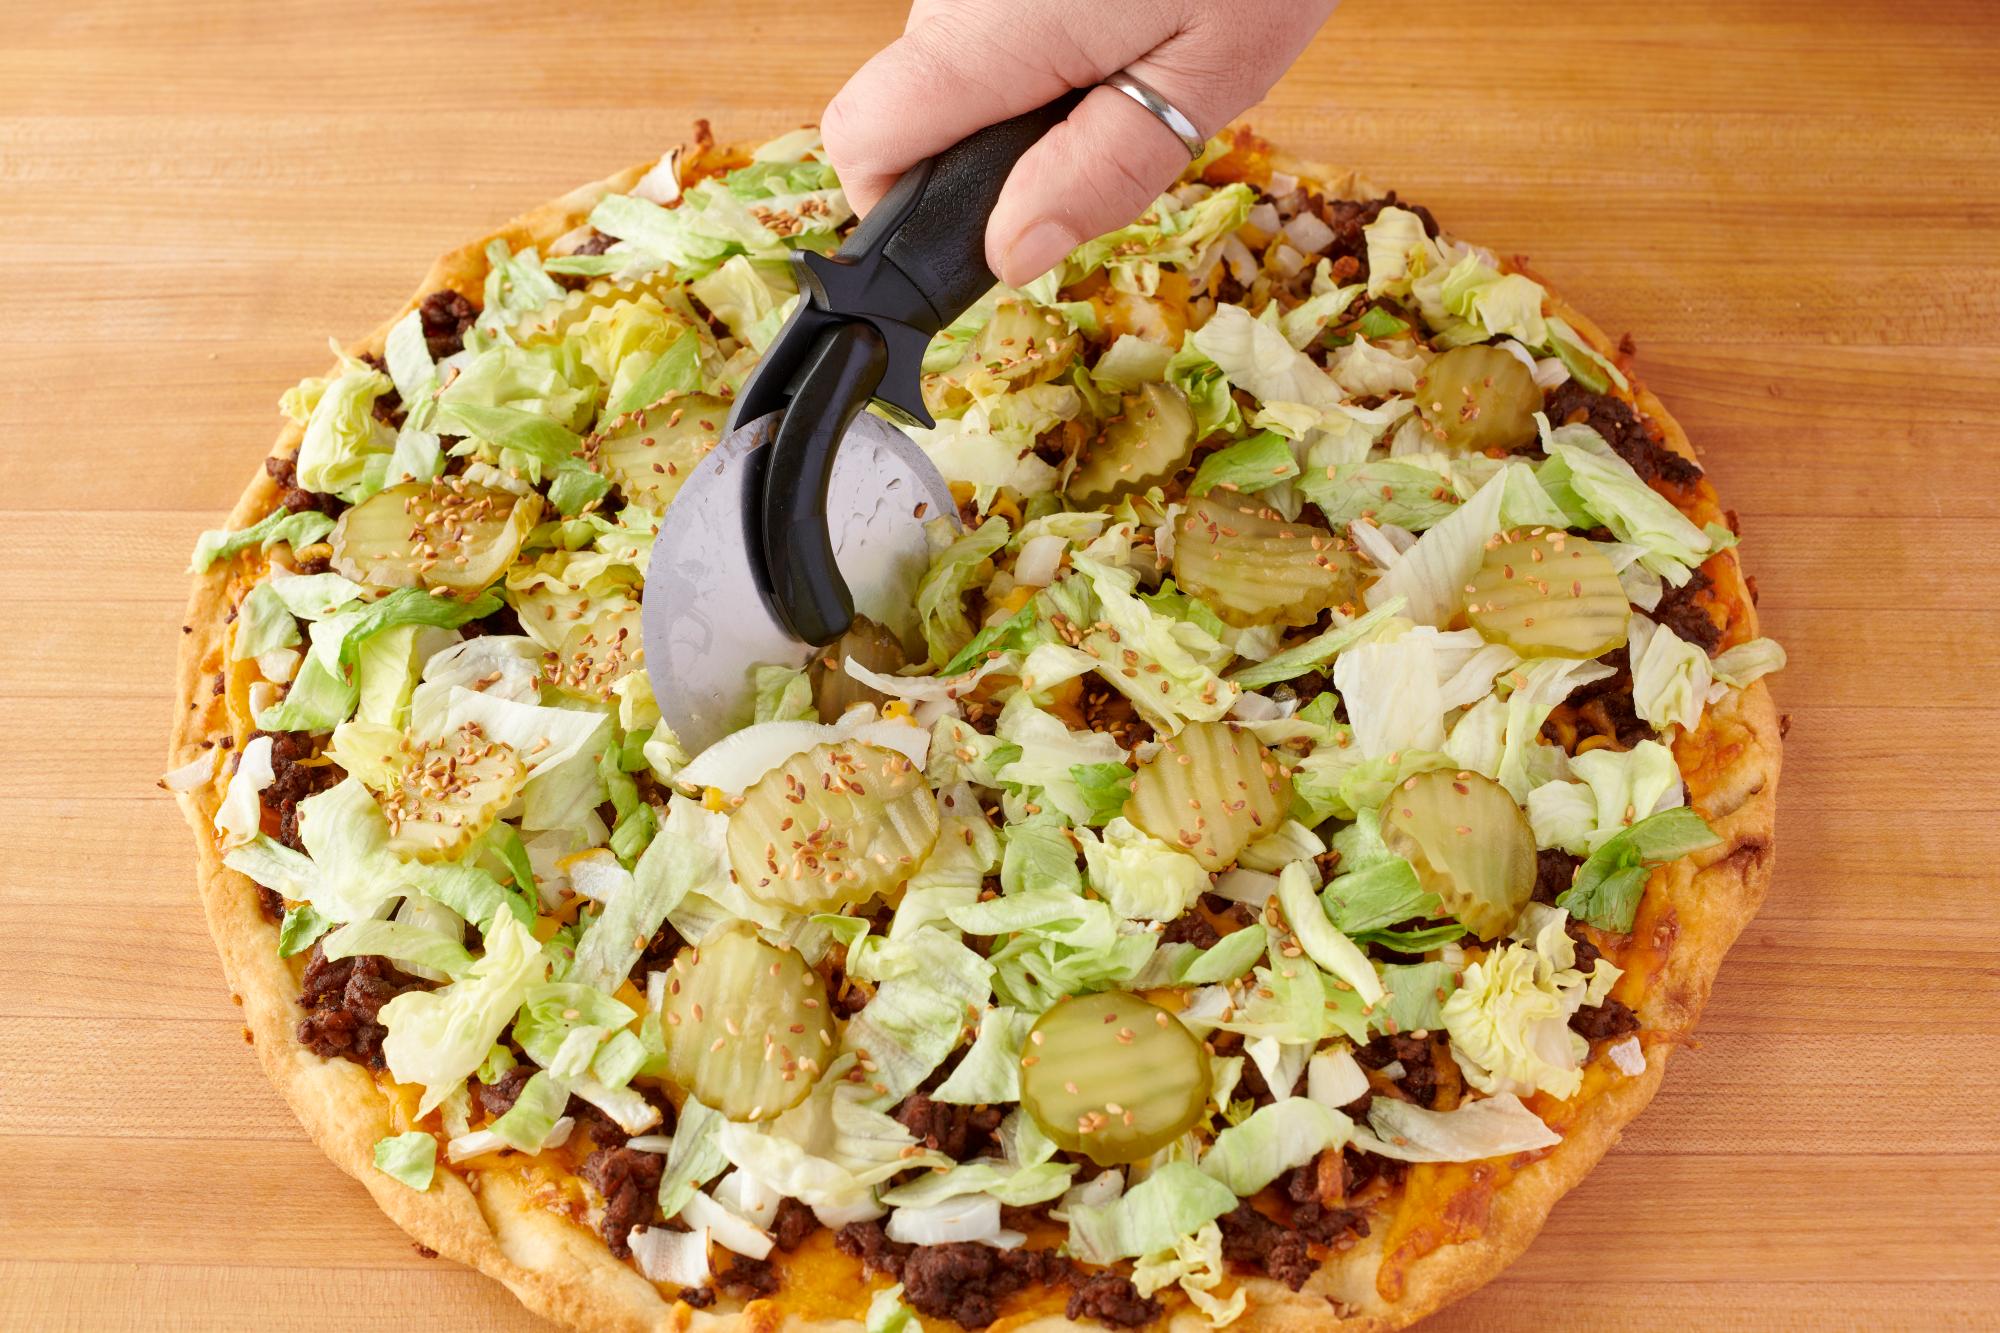 Using the Pizza Cutter to cut the pizza.